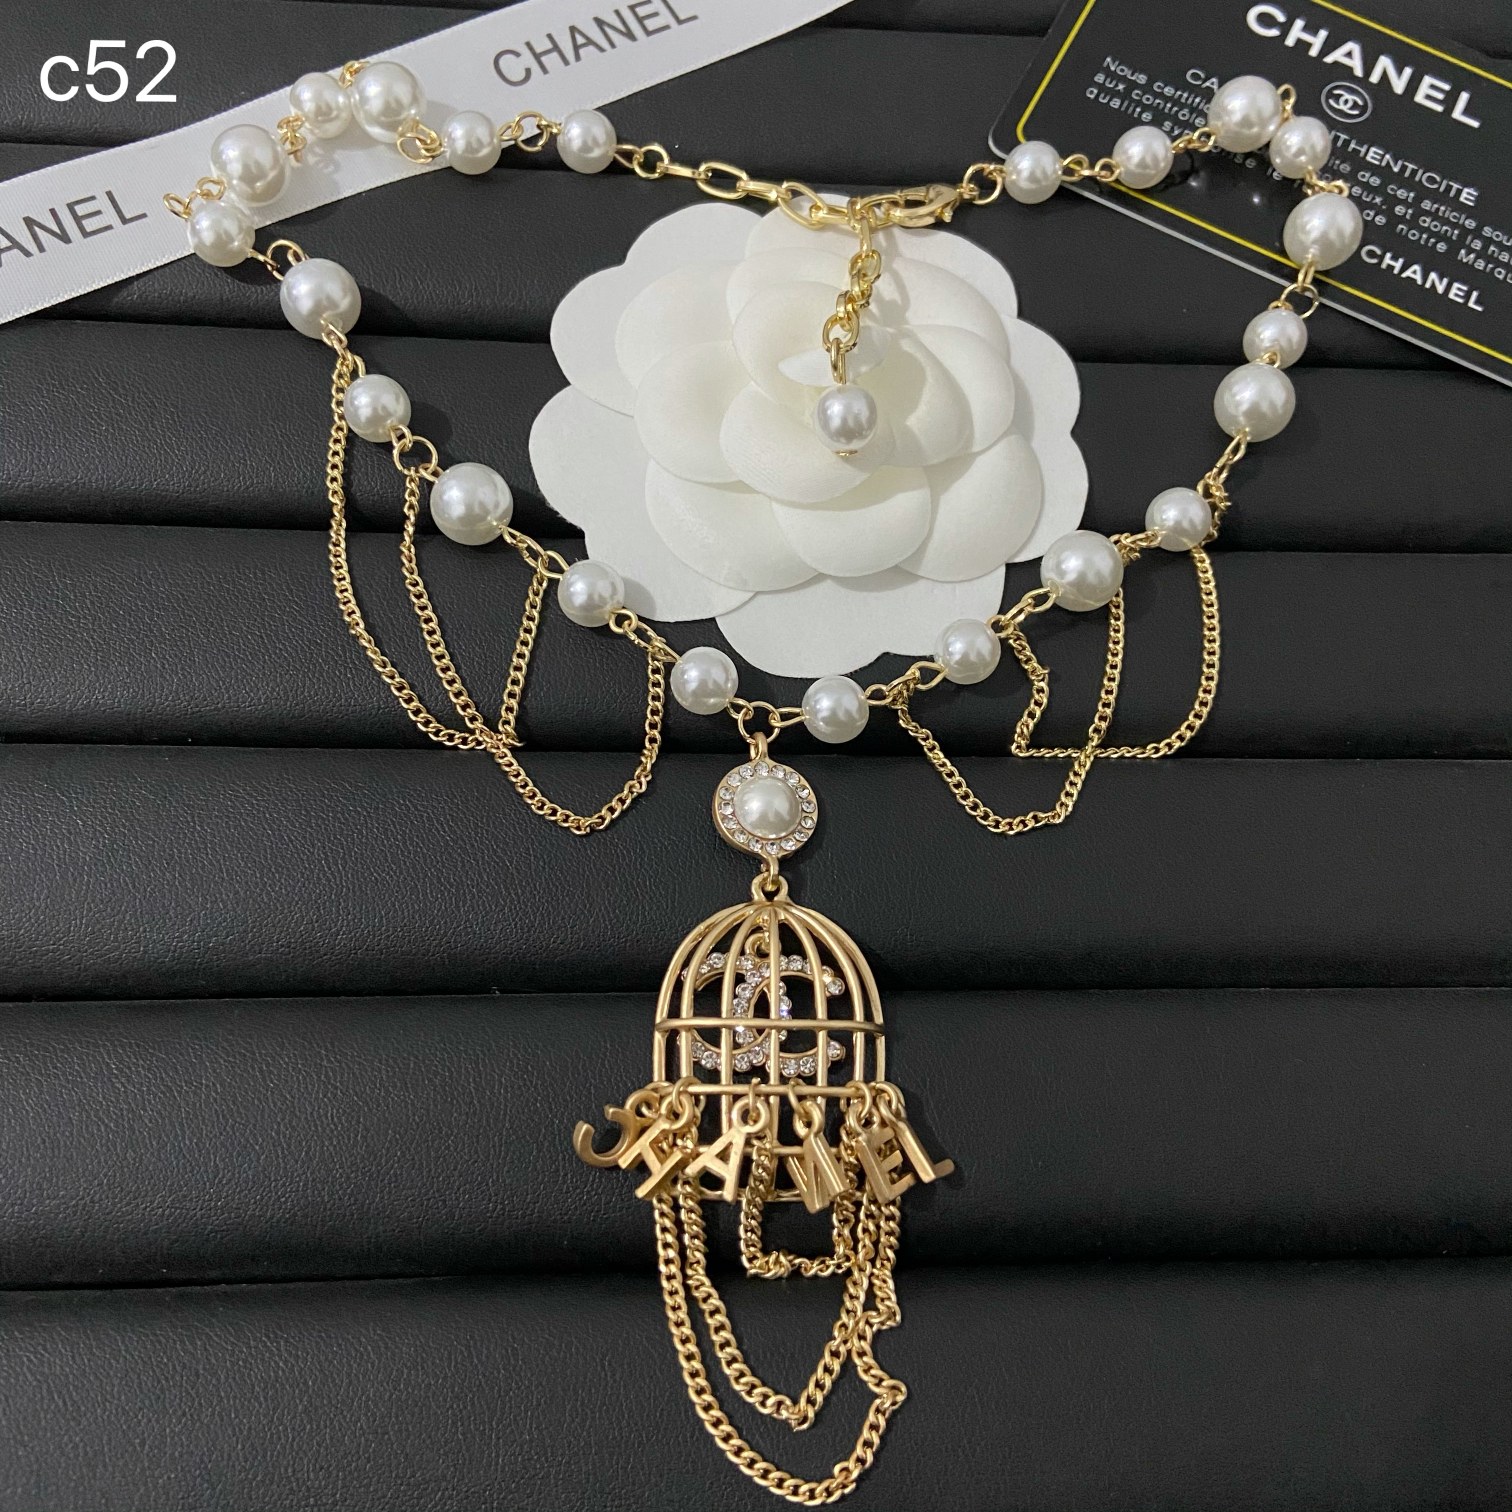 Chanel necklace 107516